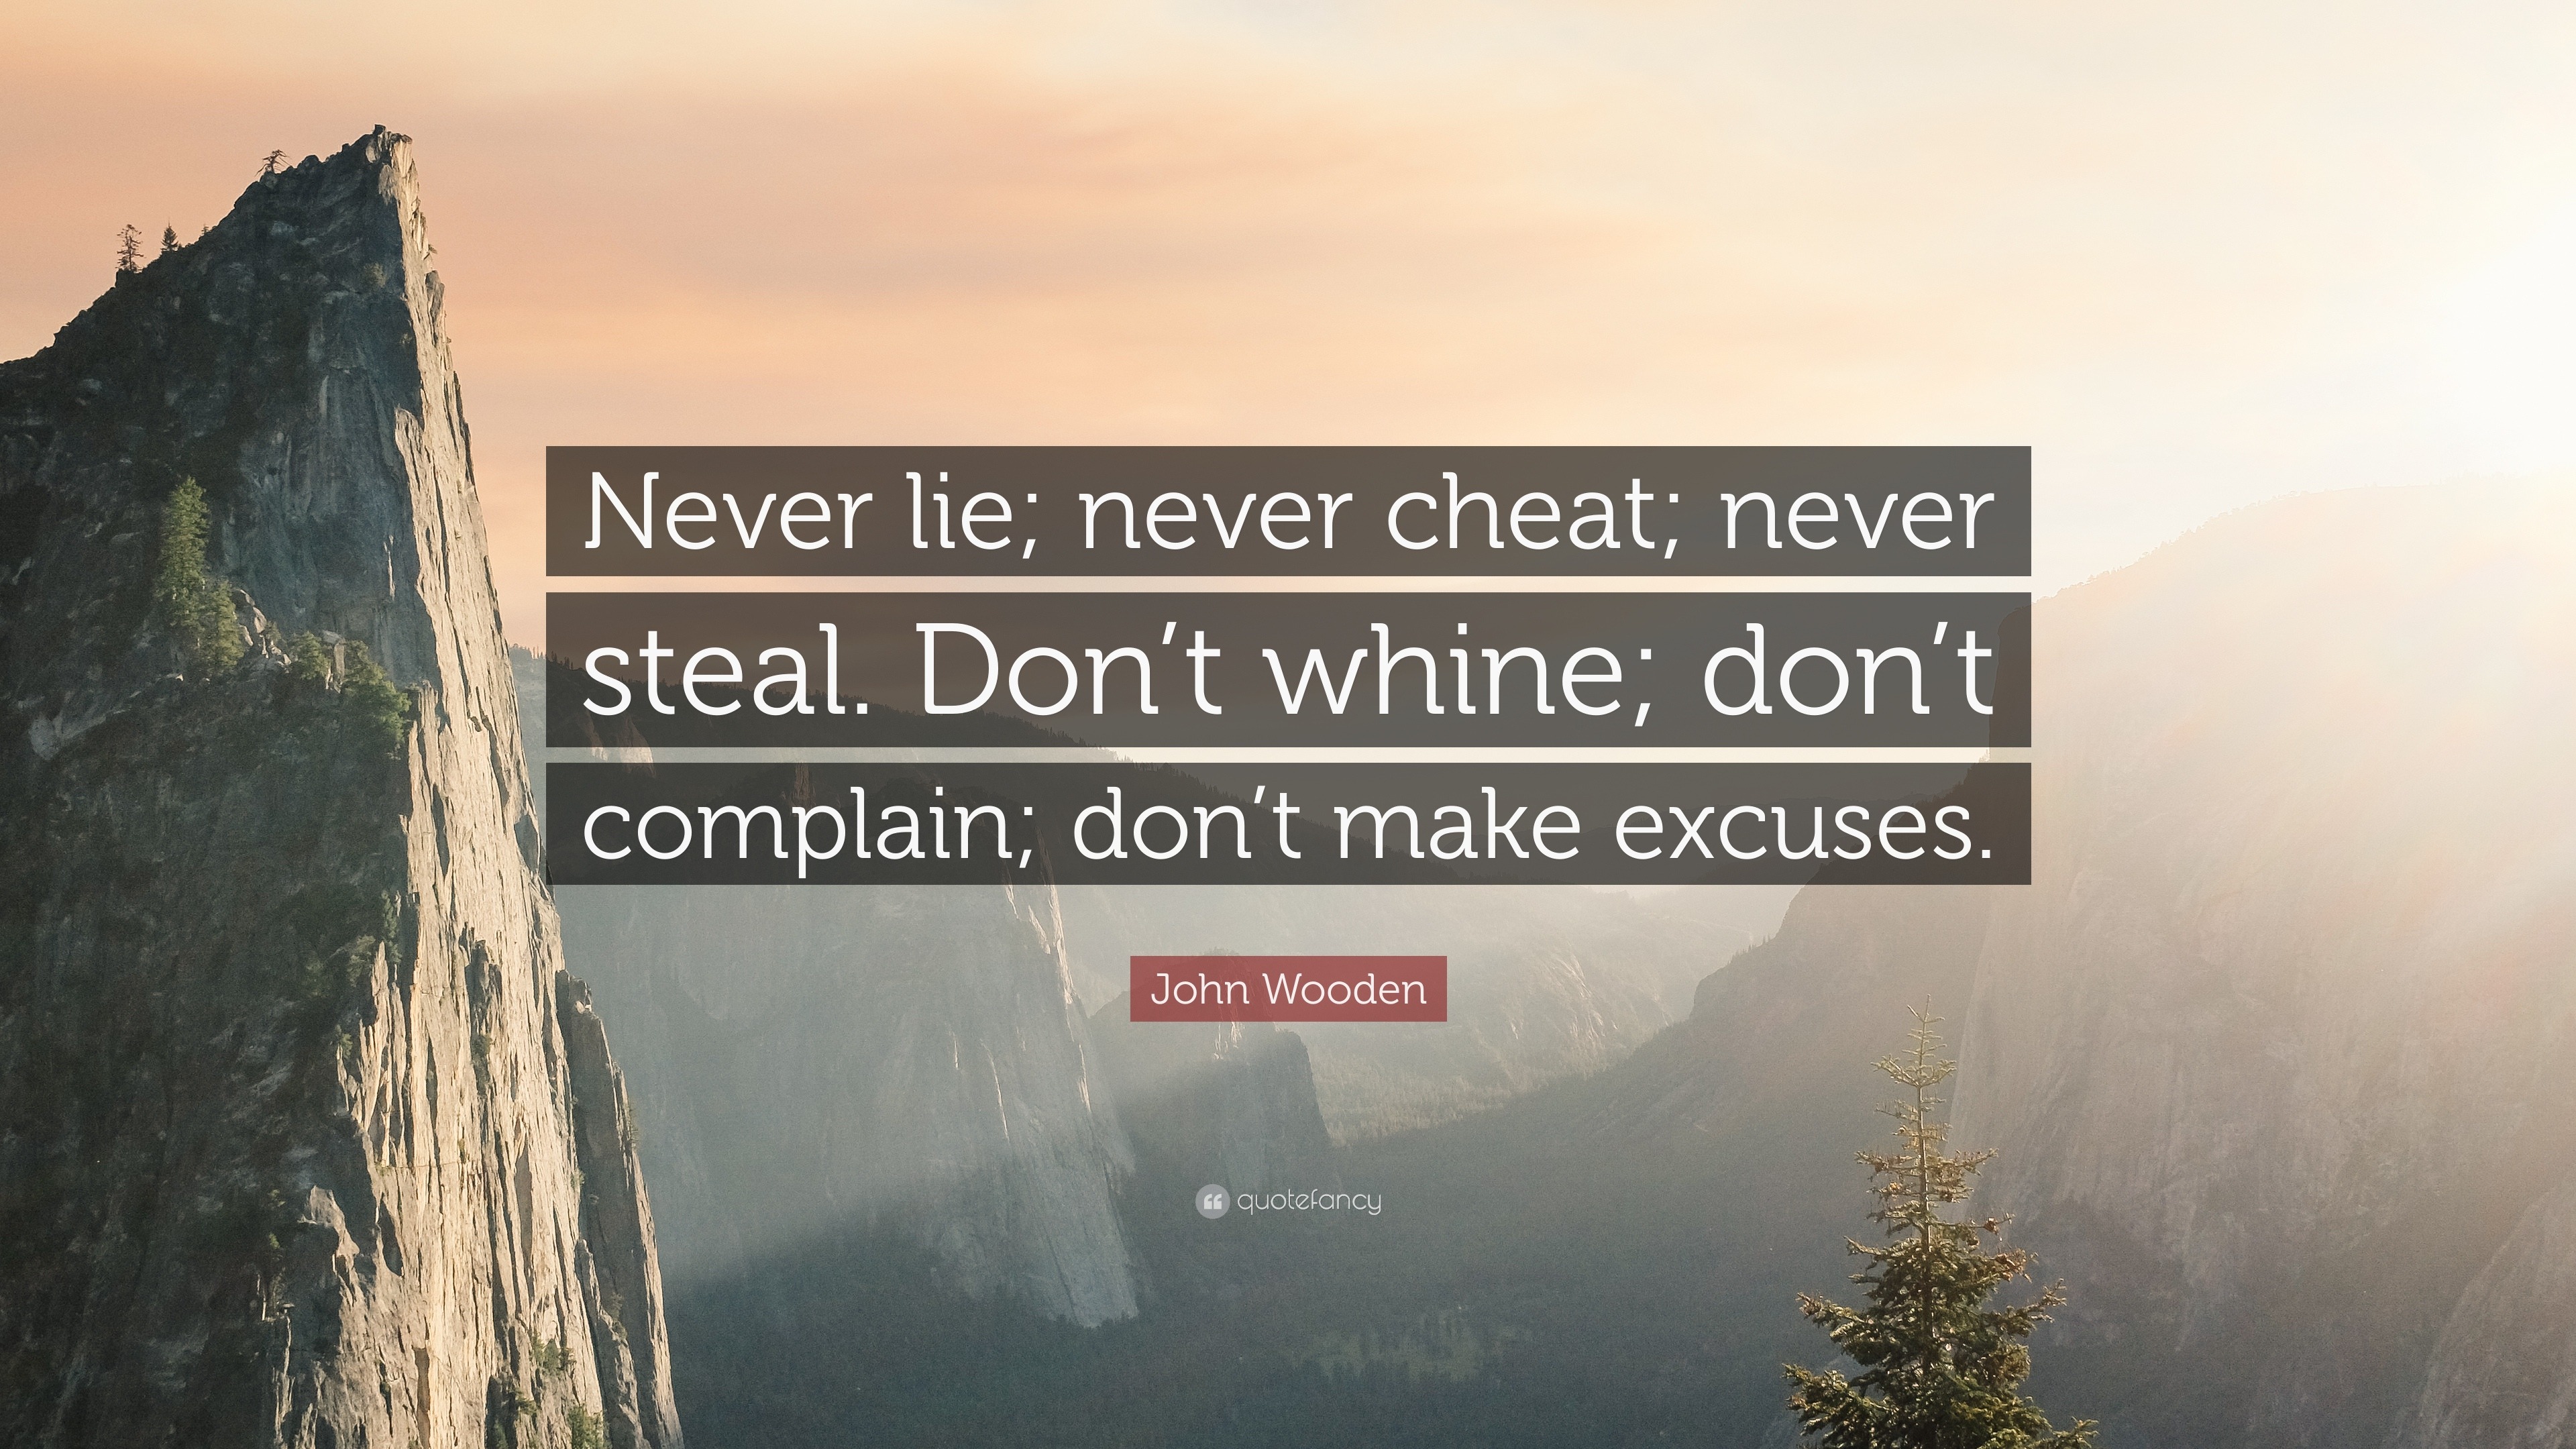 John Wooden Quote: “Never lie; never cheat; never steal. Don’t whine